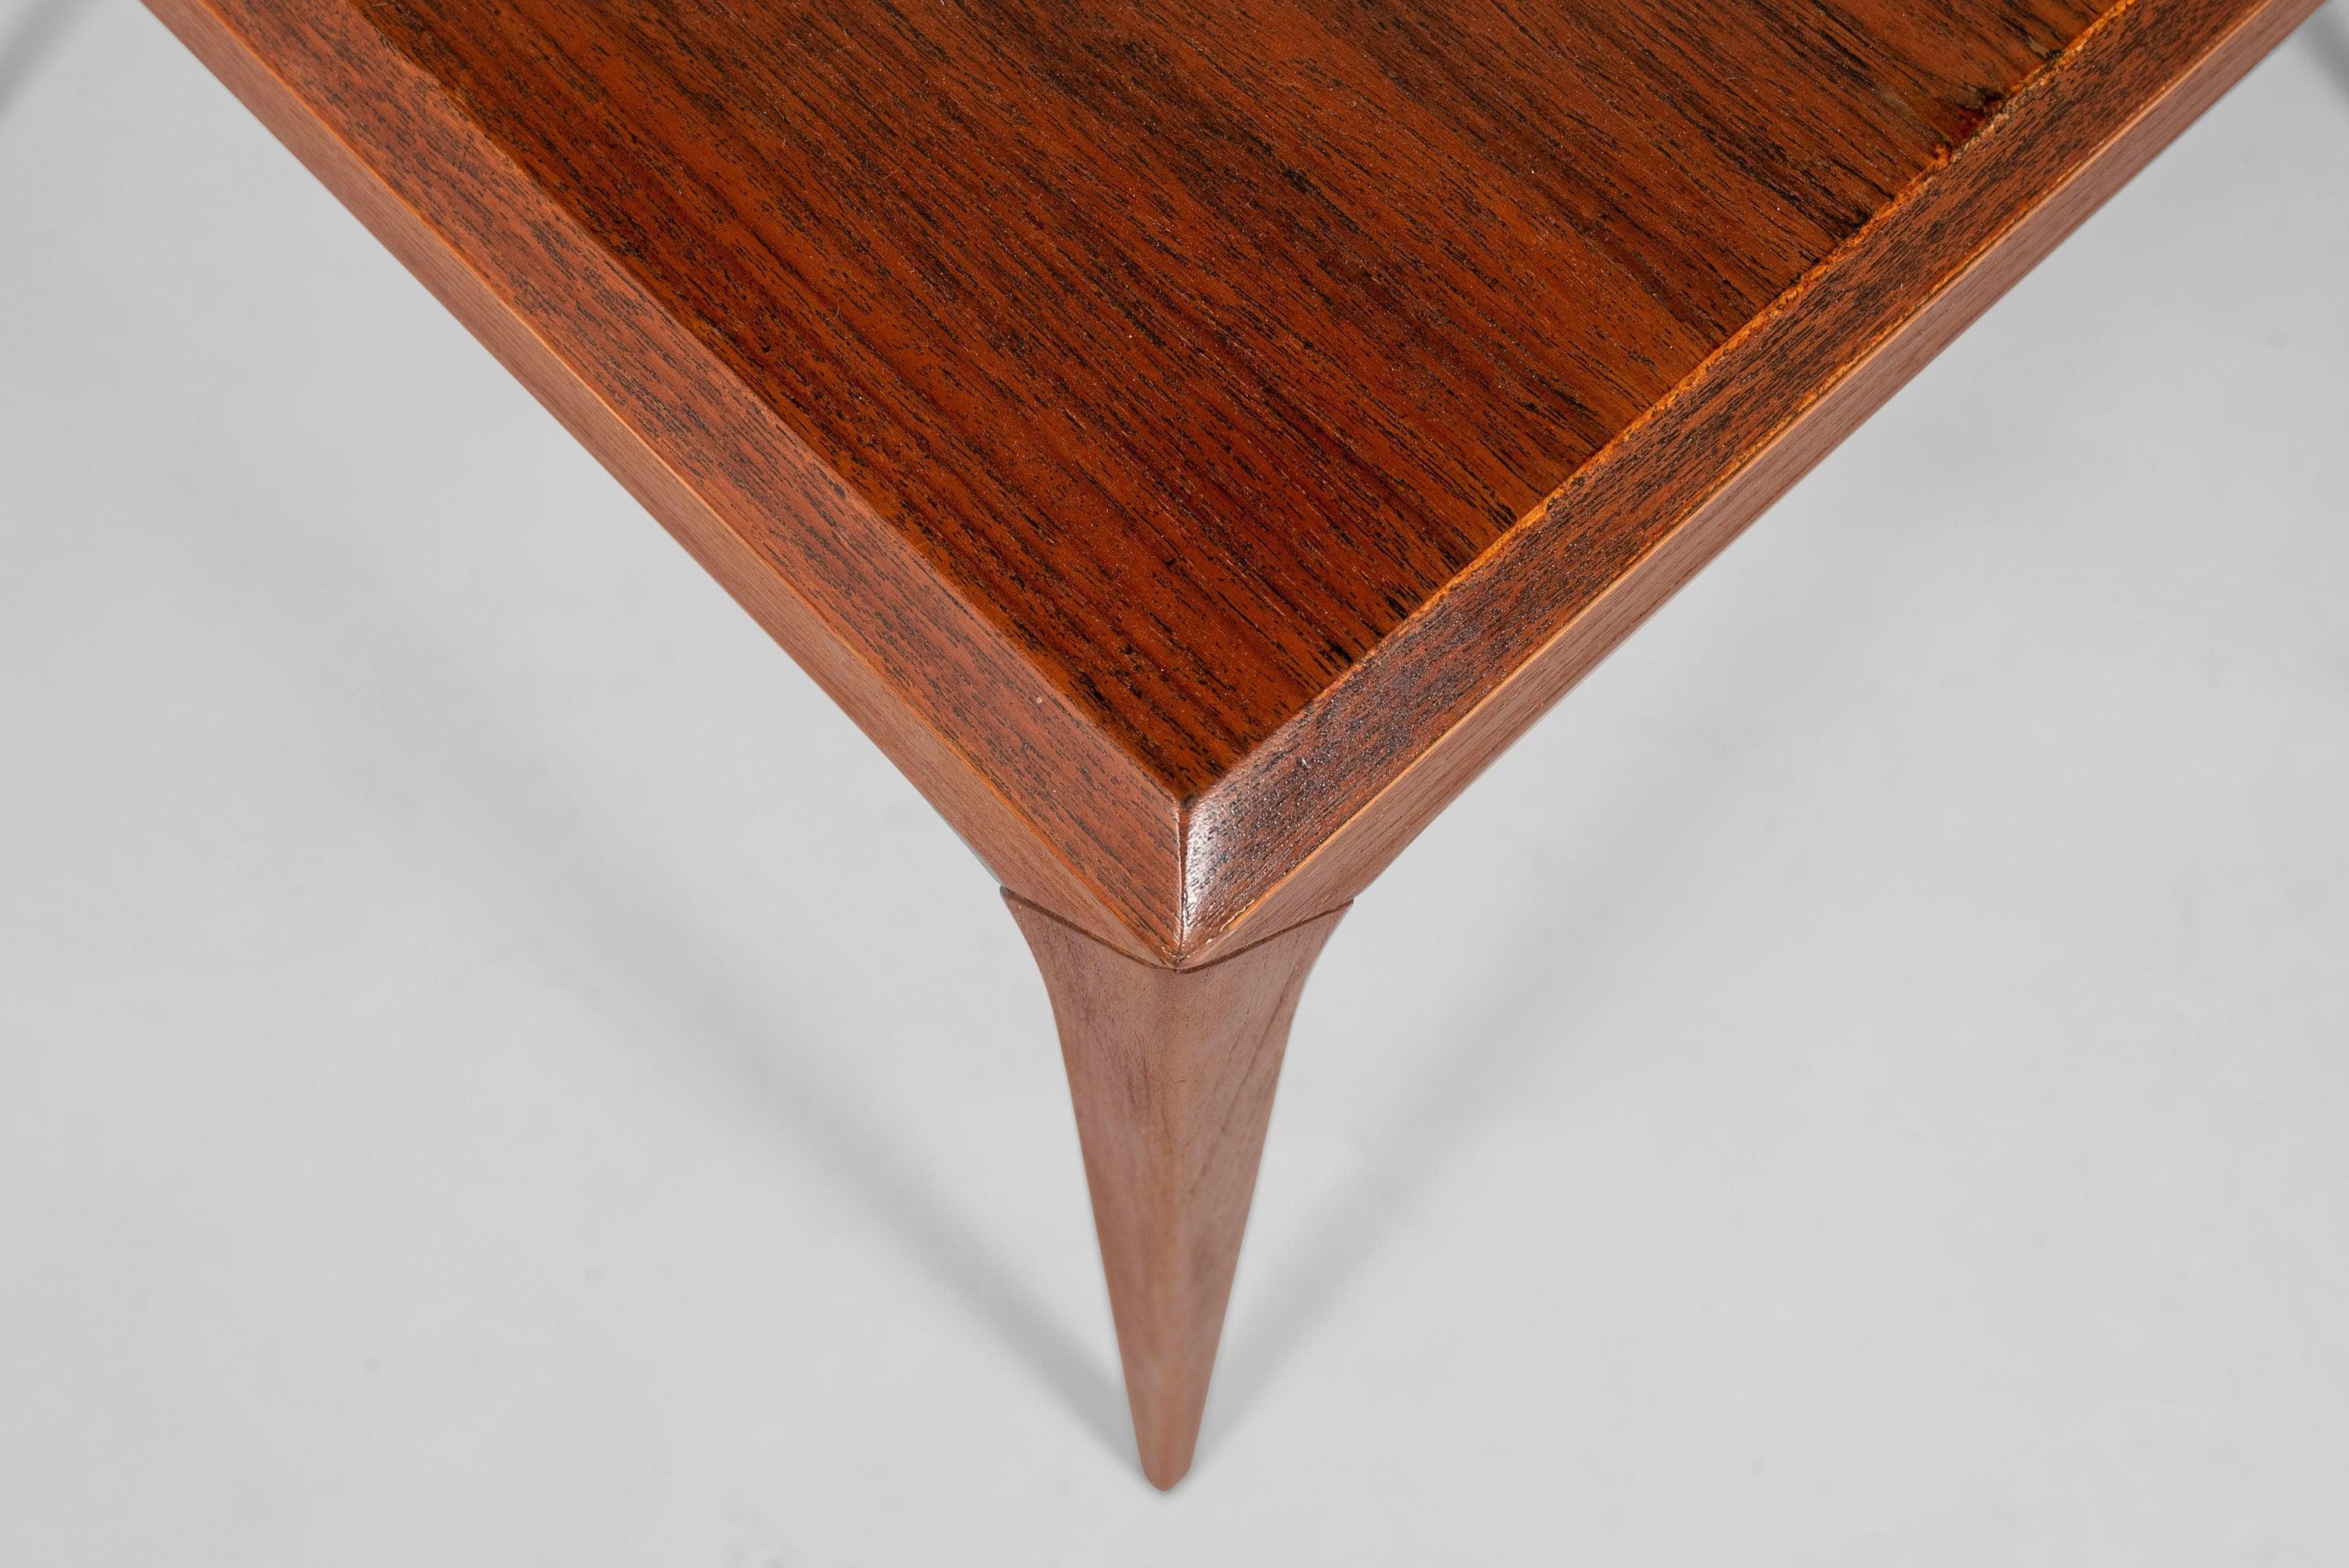 Teak Coffee Table / End Table by Johannes Andersen for CFC Silkeborg, Denmark In Good Condition For Sale In Deland, FL